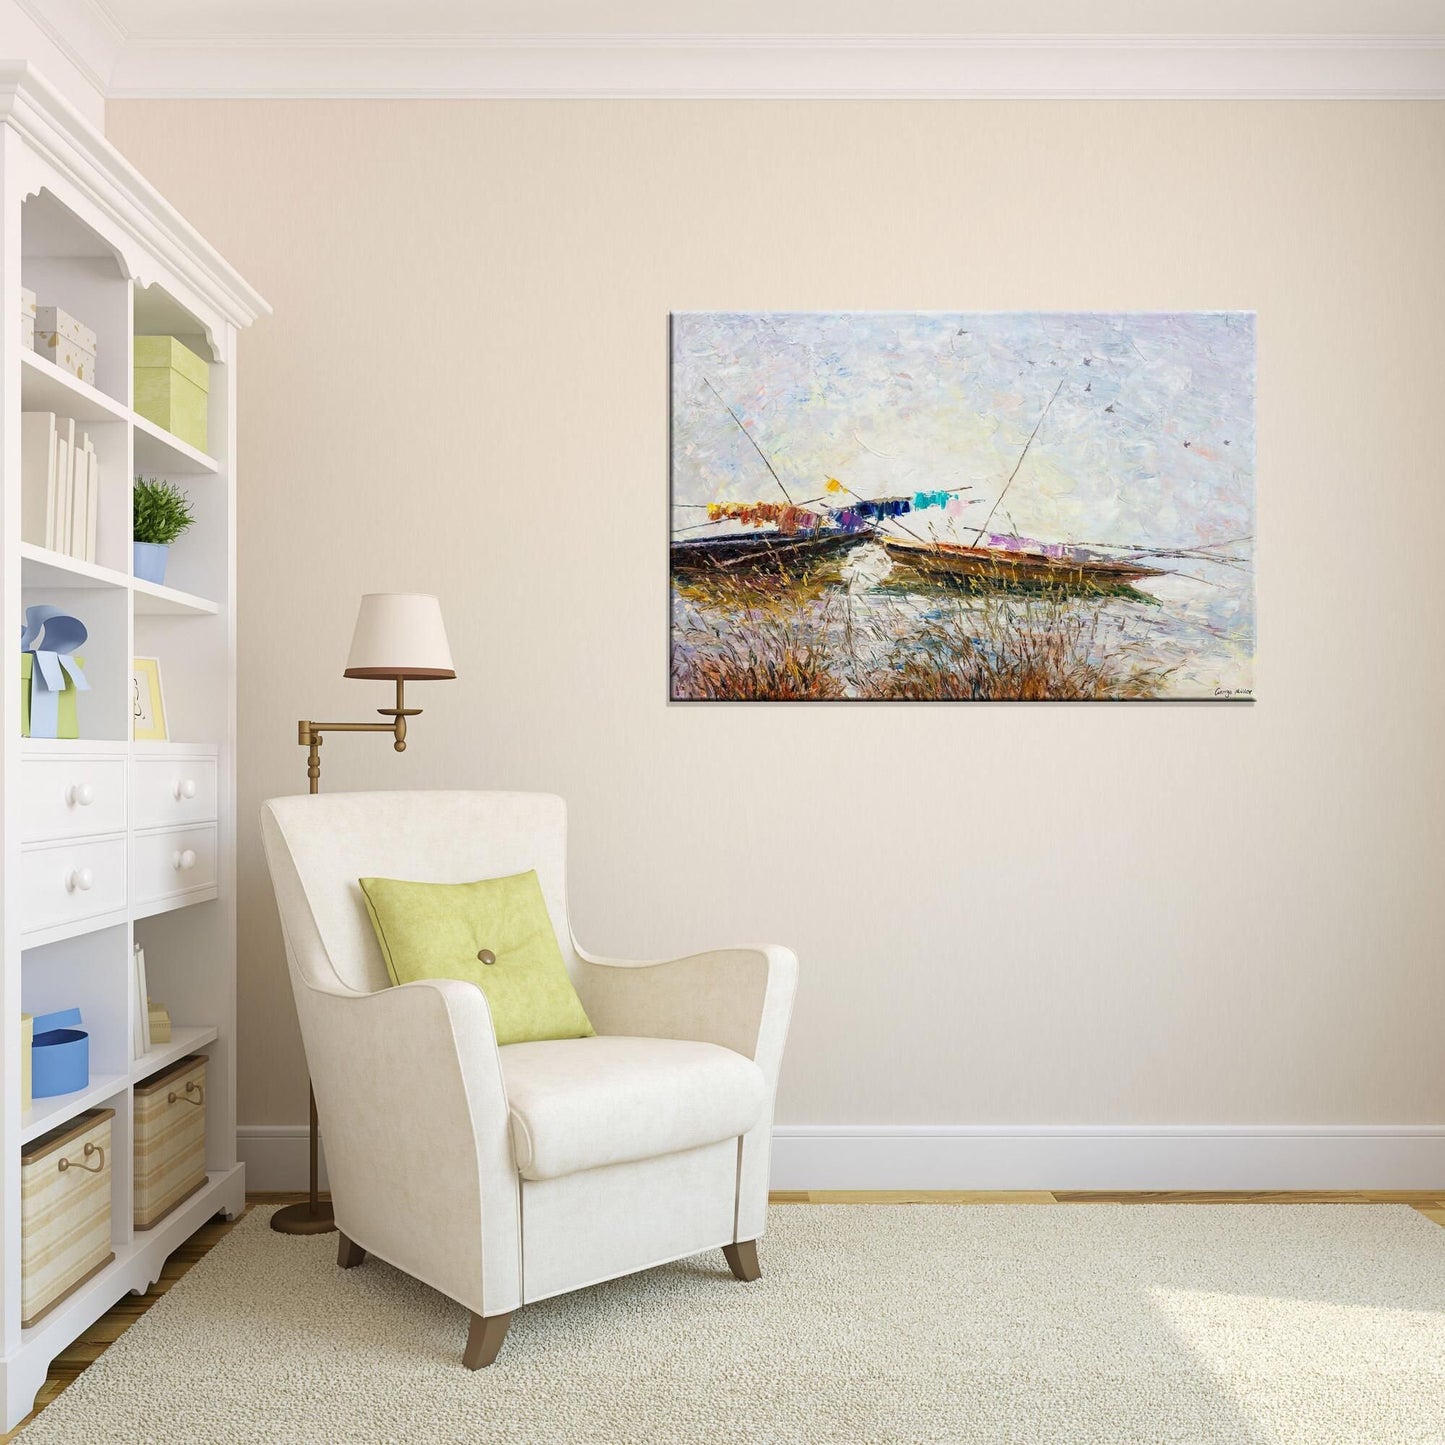 Oil Painting, Palette Knife Painting, Seascape, Finshing Boats at Sea, Original Abstract Art, Modern Painting, Large Wall Decor, Original